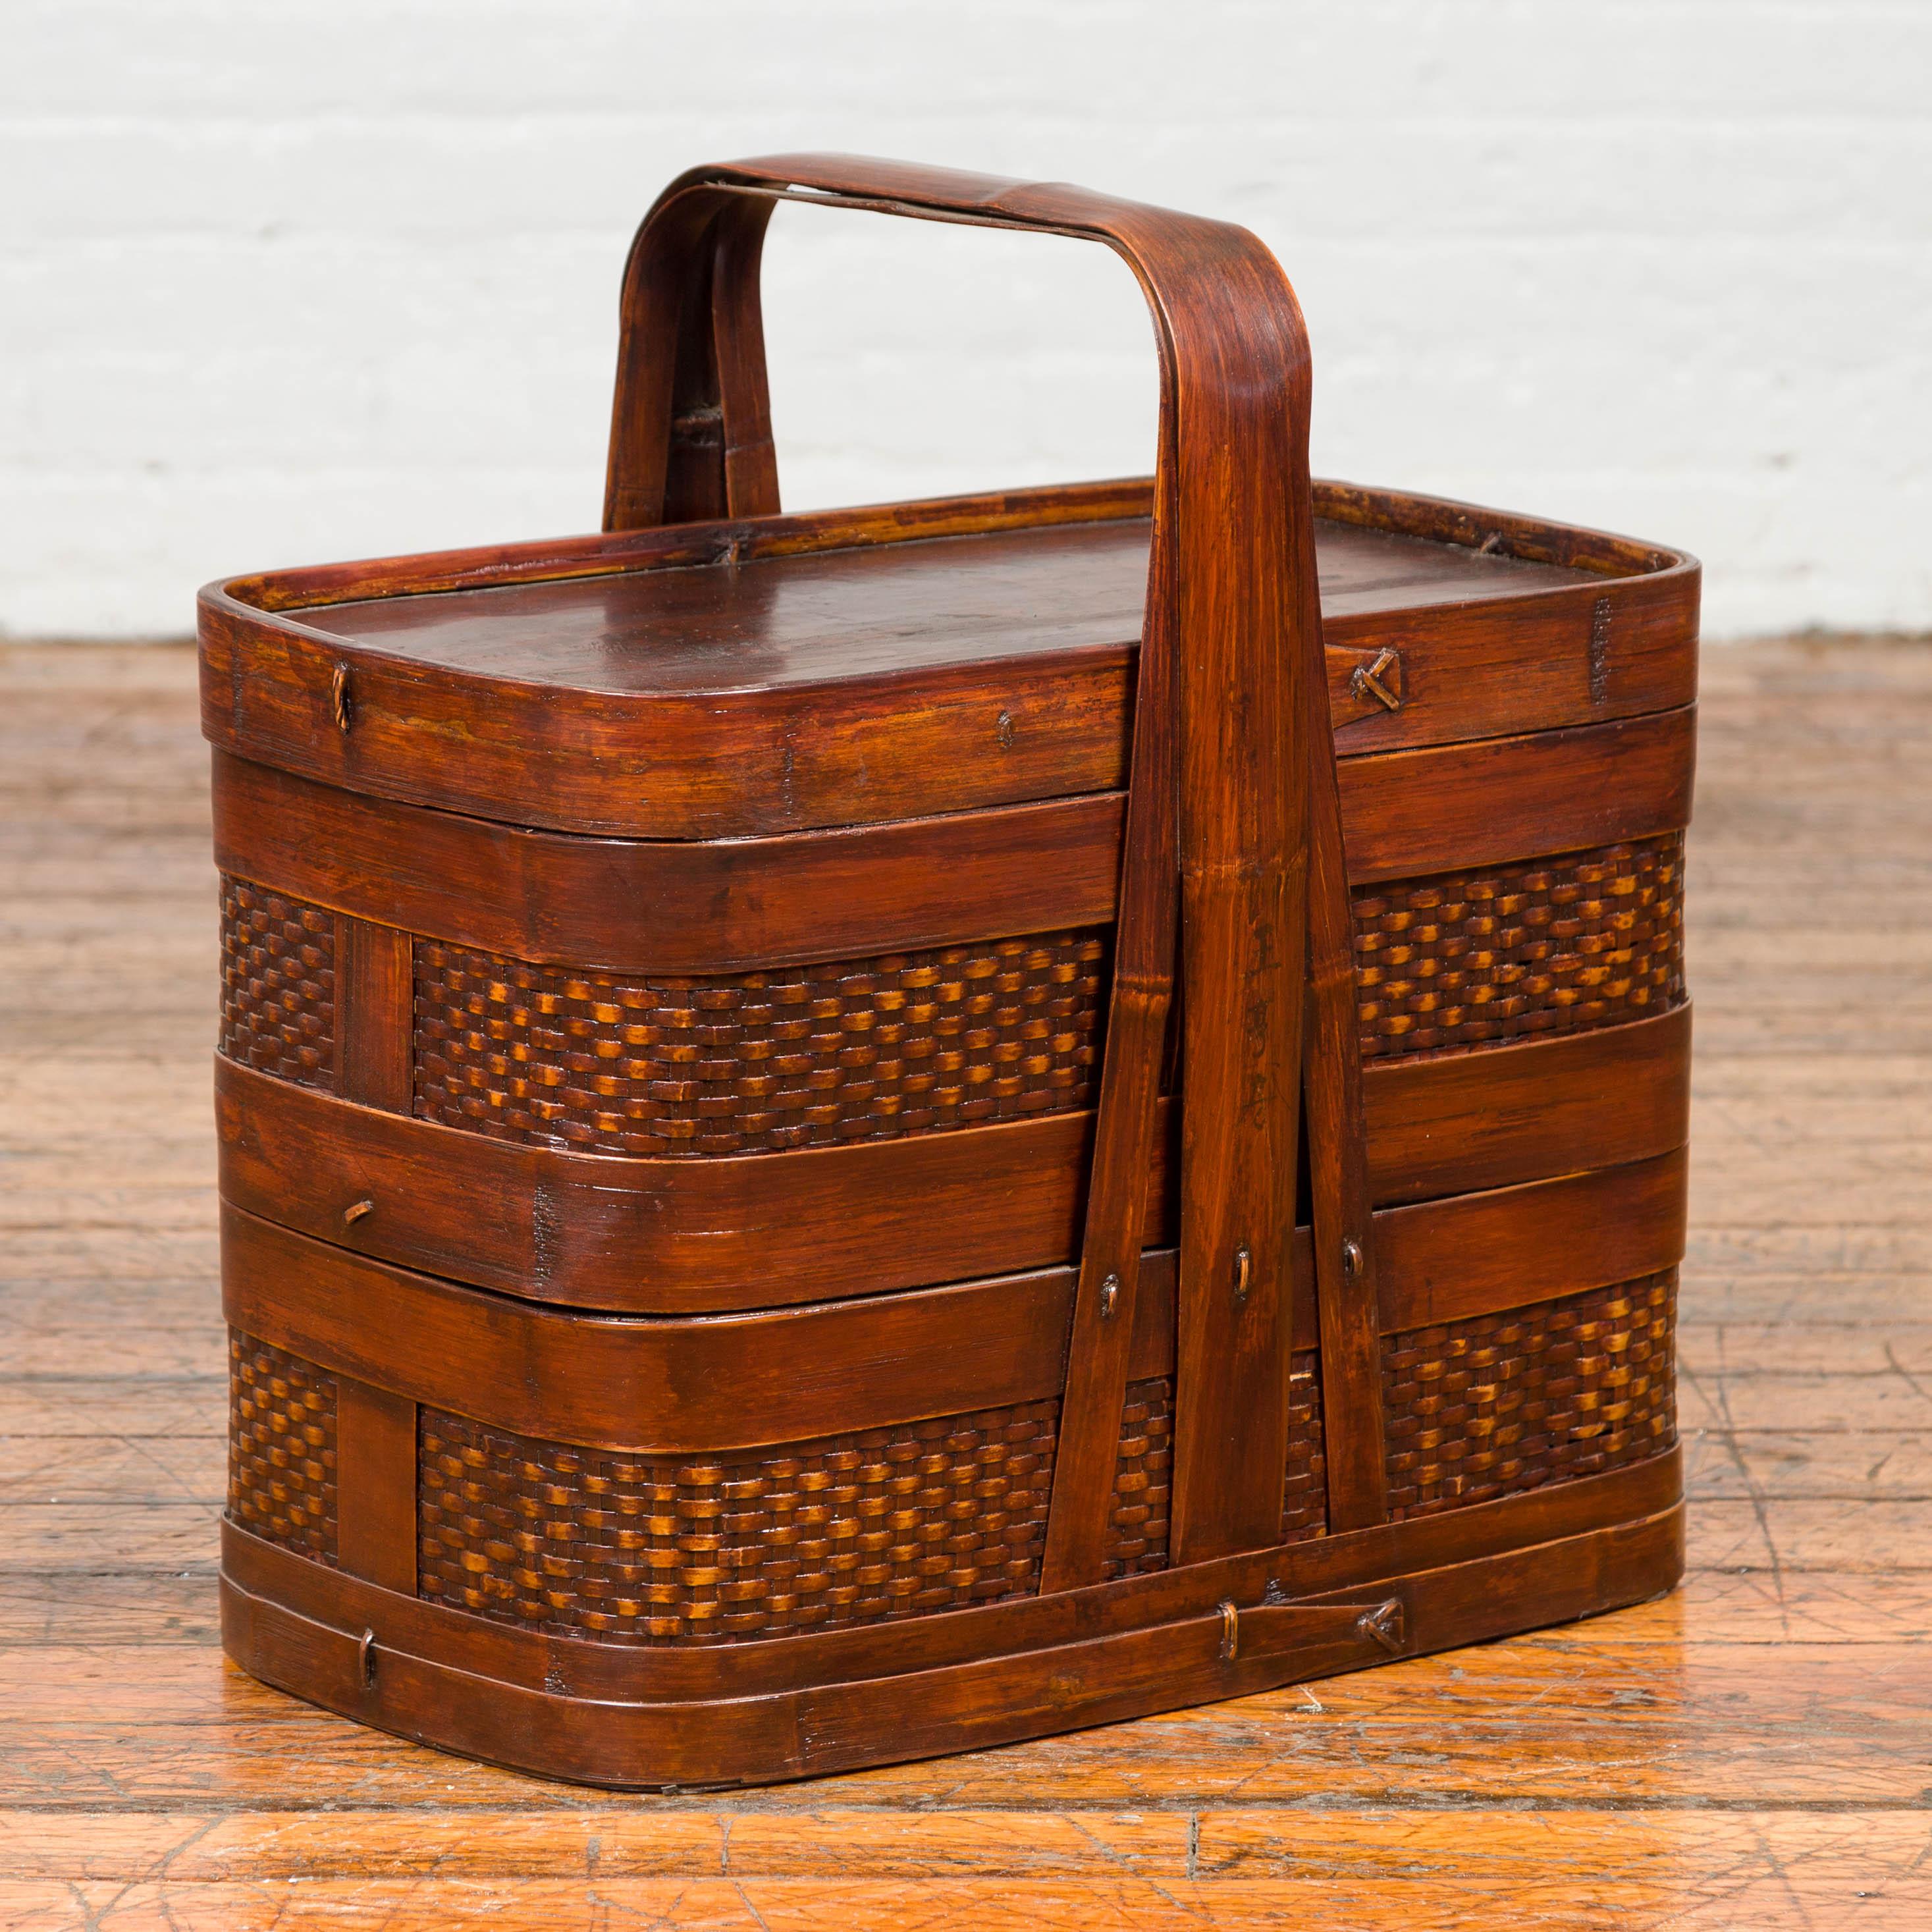 A Chinese vintage two-tier rattan and bamboo lunch basket from the mid-20th century, with large handle and lid. Born in China during the midcentury period, this lunch basket features two independent compartments topped with a rectangular lid.